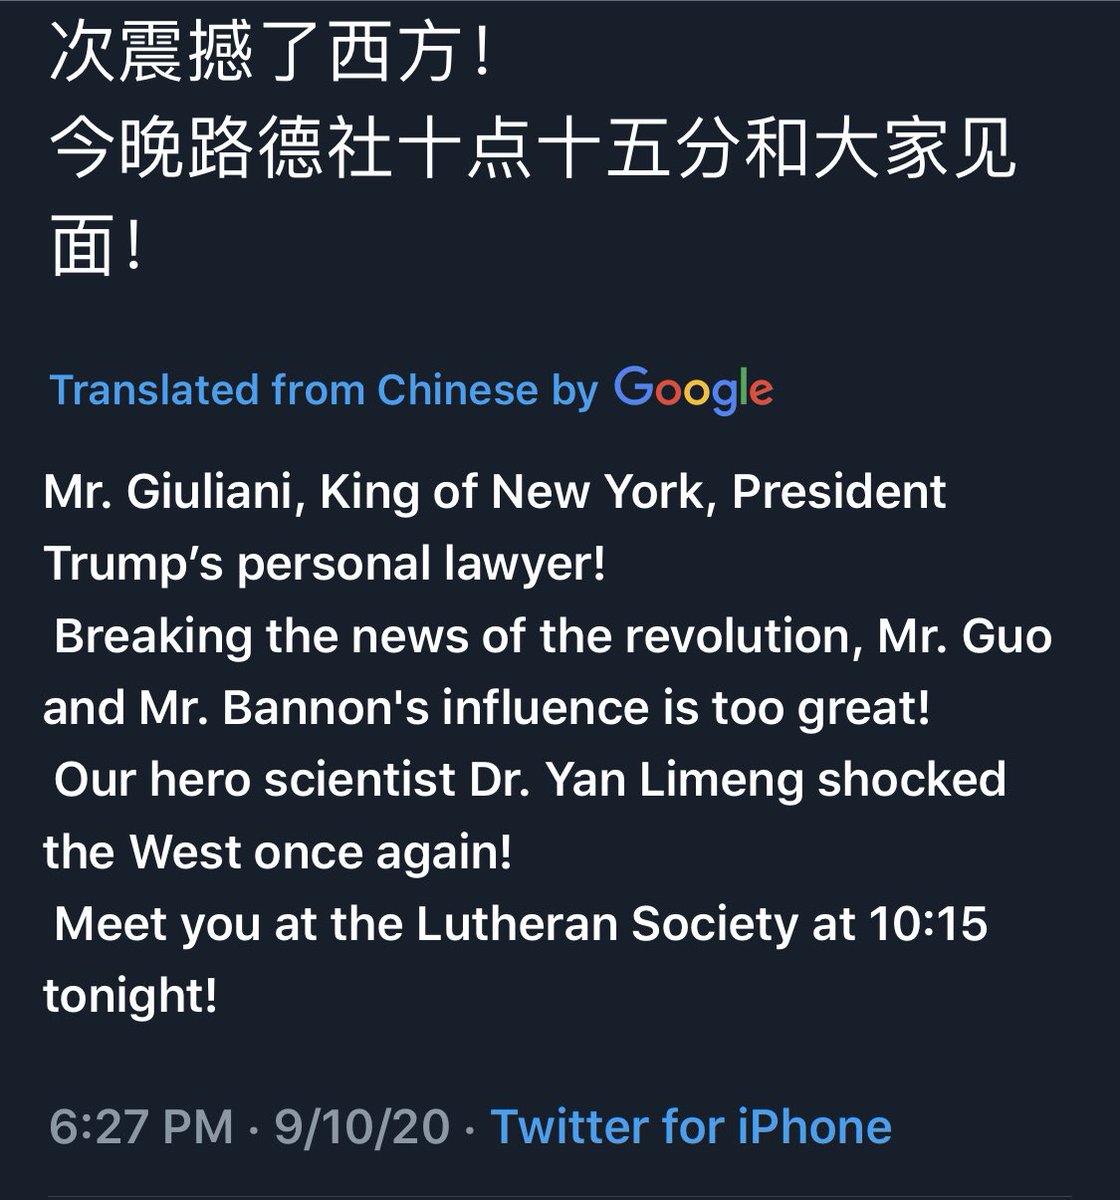 Guo’s group seems to believe they have Rudy Giuliani’s support.